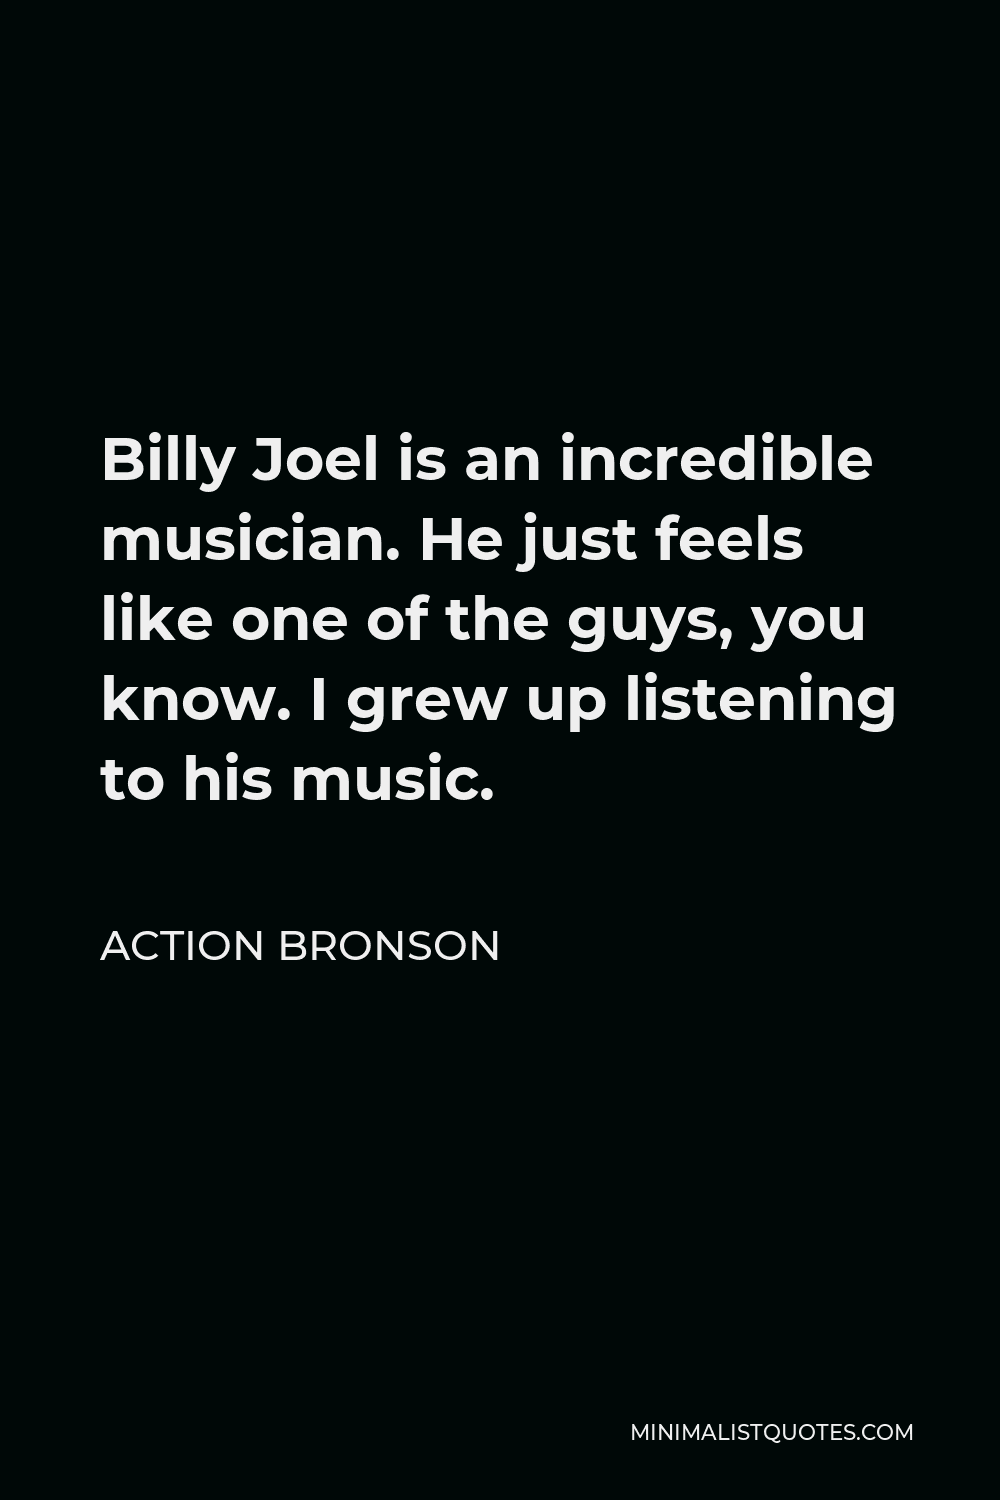 Action Bronson Quote - Billy Joel is an incredible musician. He just feels like one of the guys, you know. I grew up listening to his music.